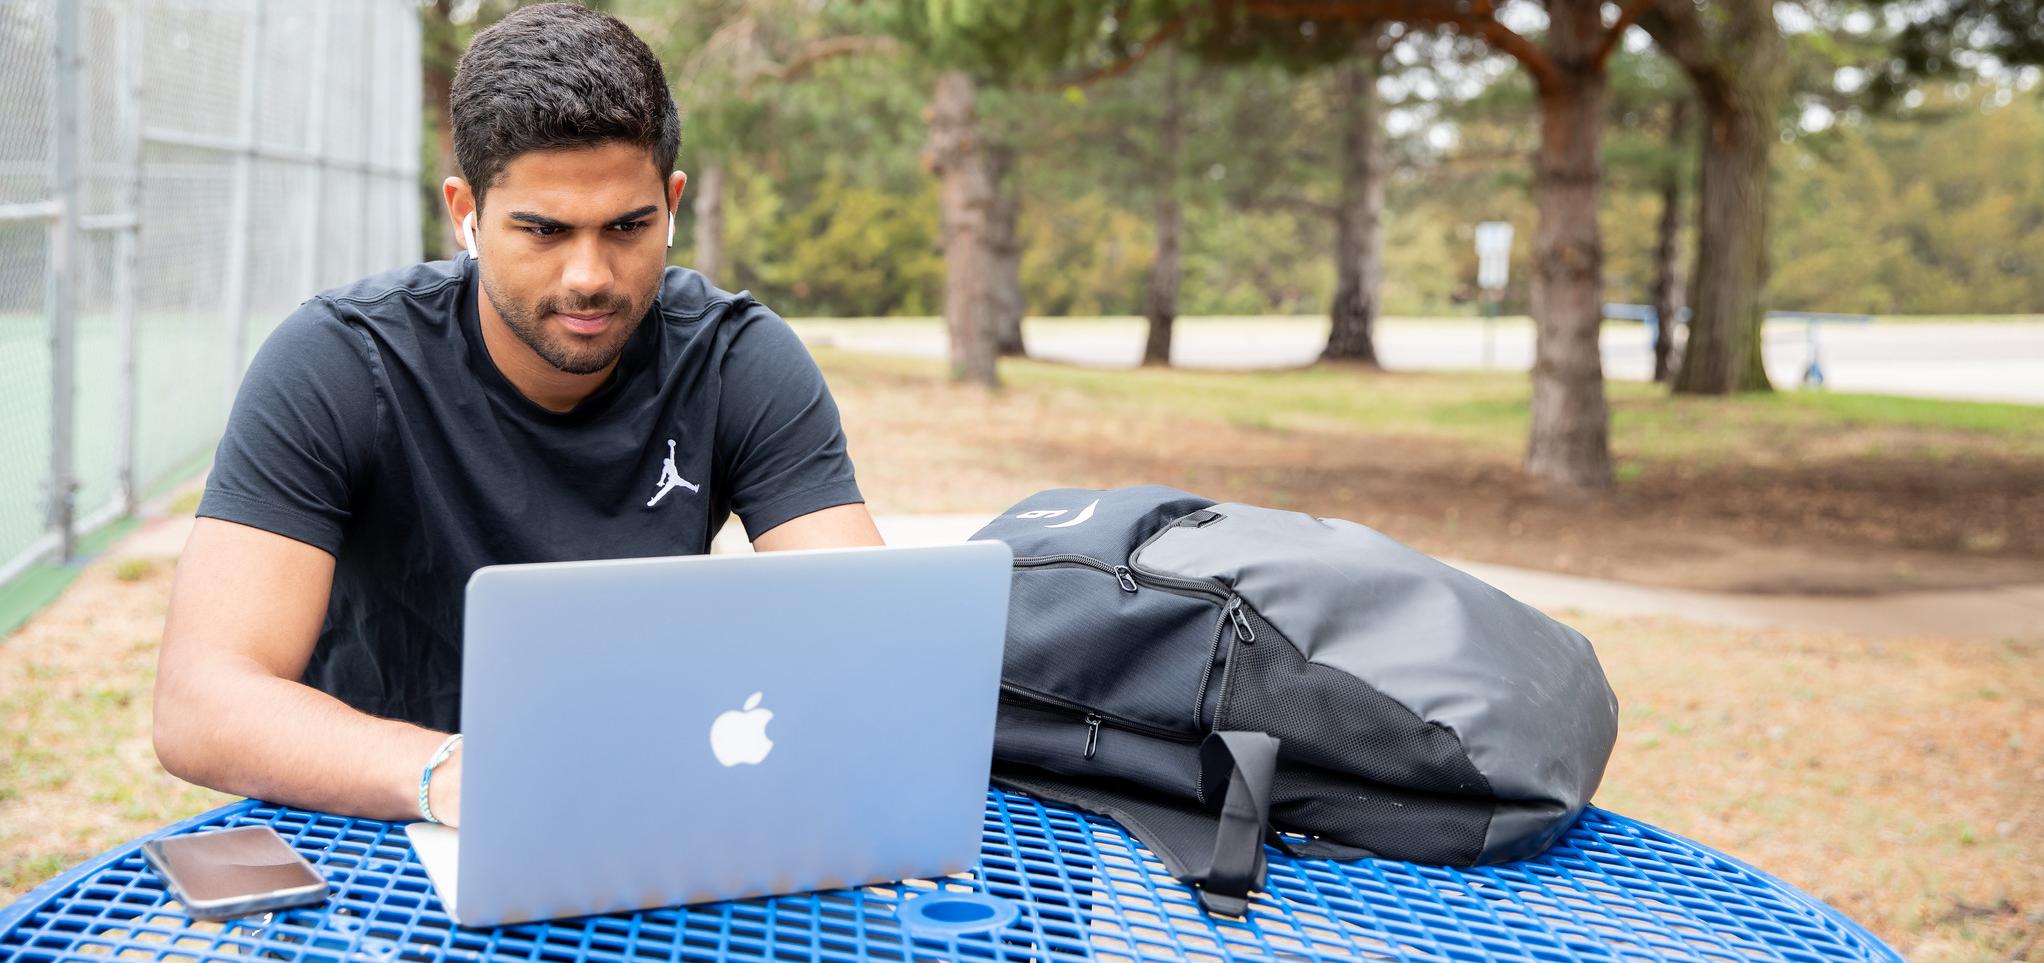 Student sitting in a park at a picnic table. There is a backpack, open laptop, and cell phone on the table.